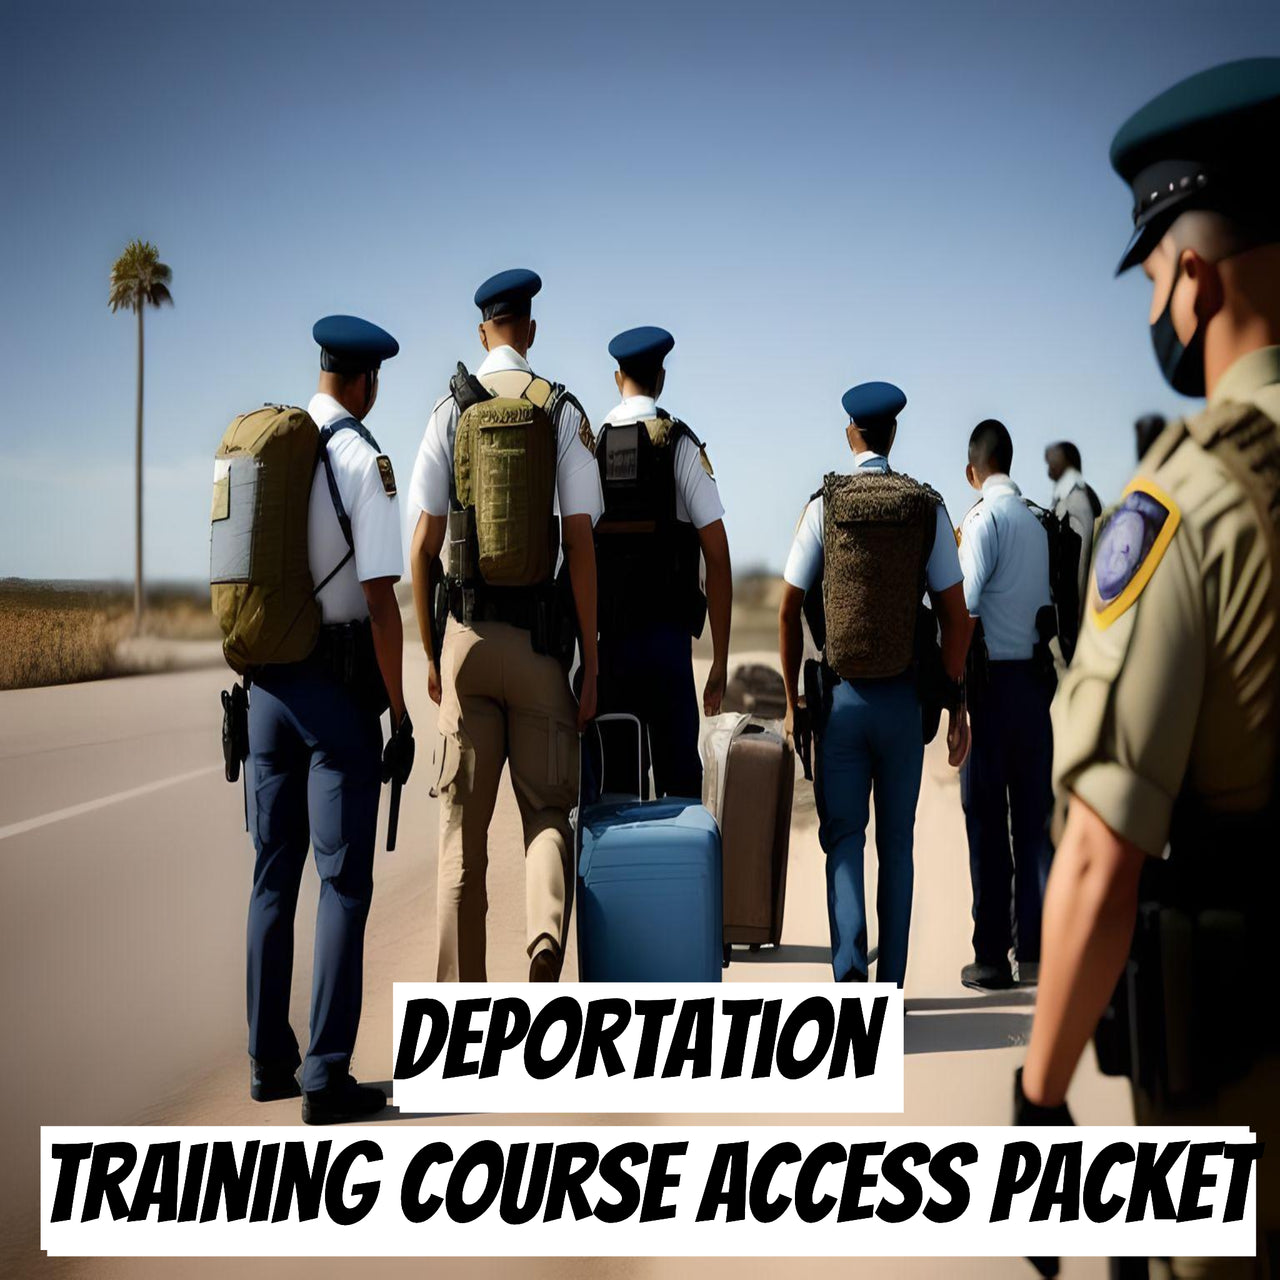 Deportation Training Course Access Packet